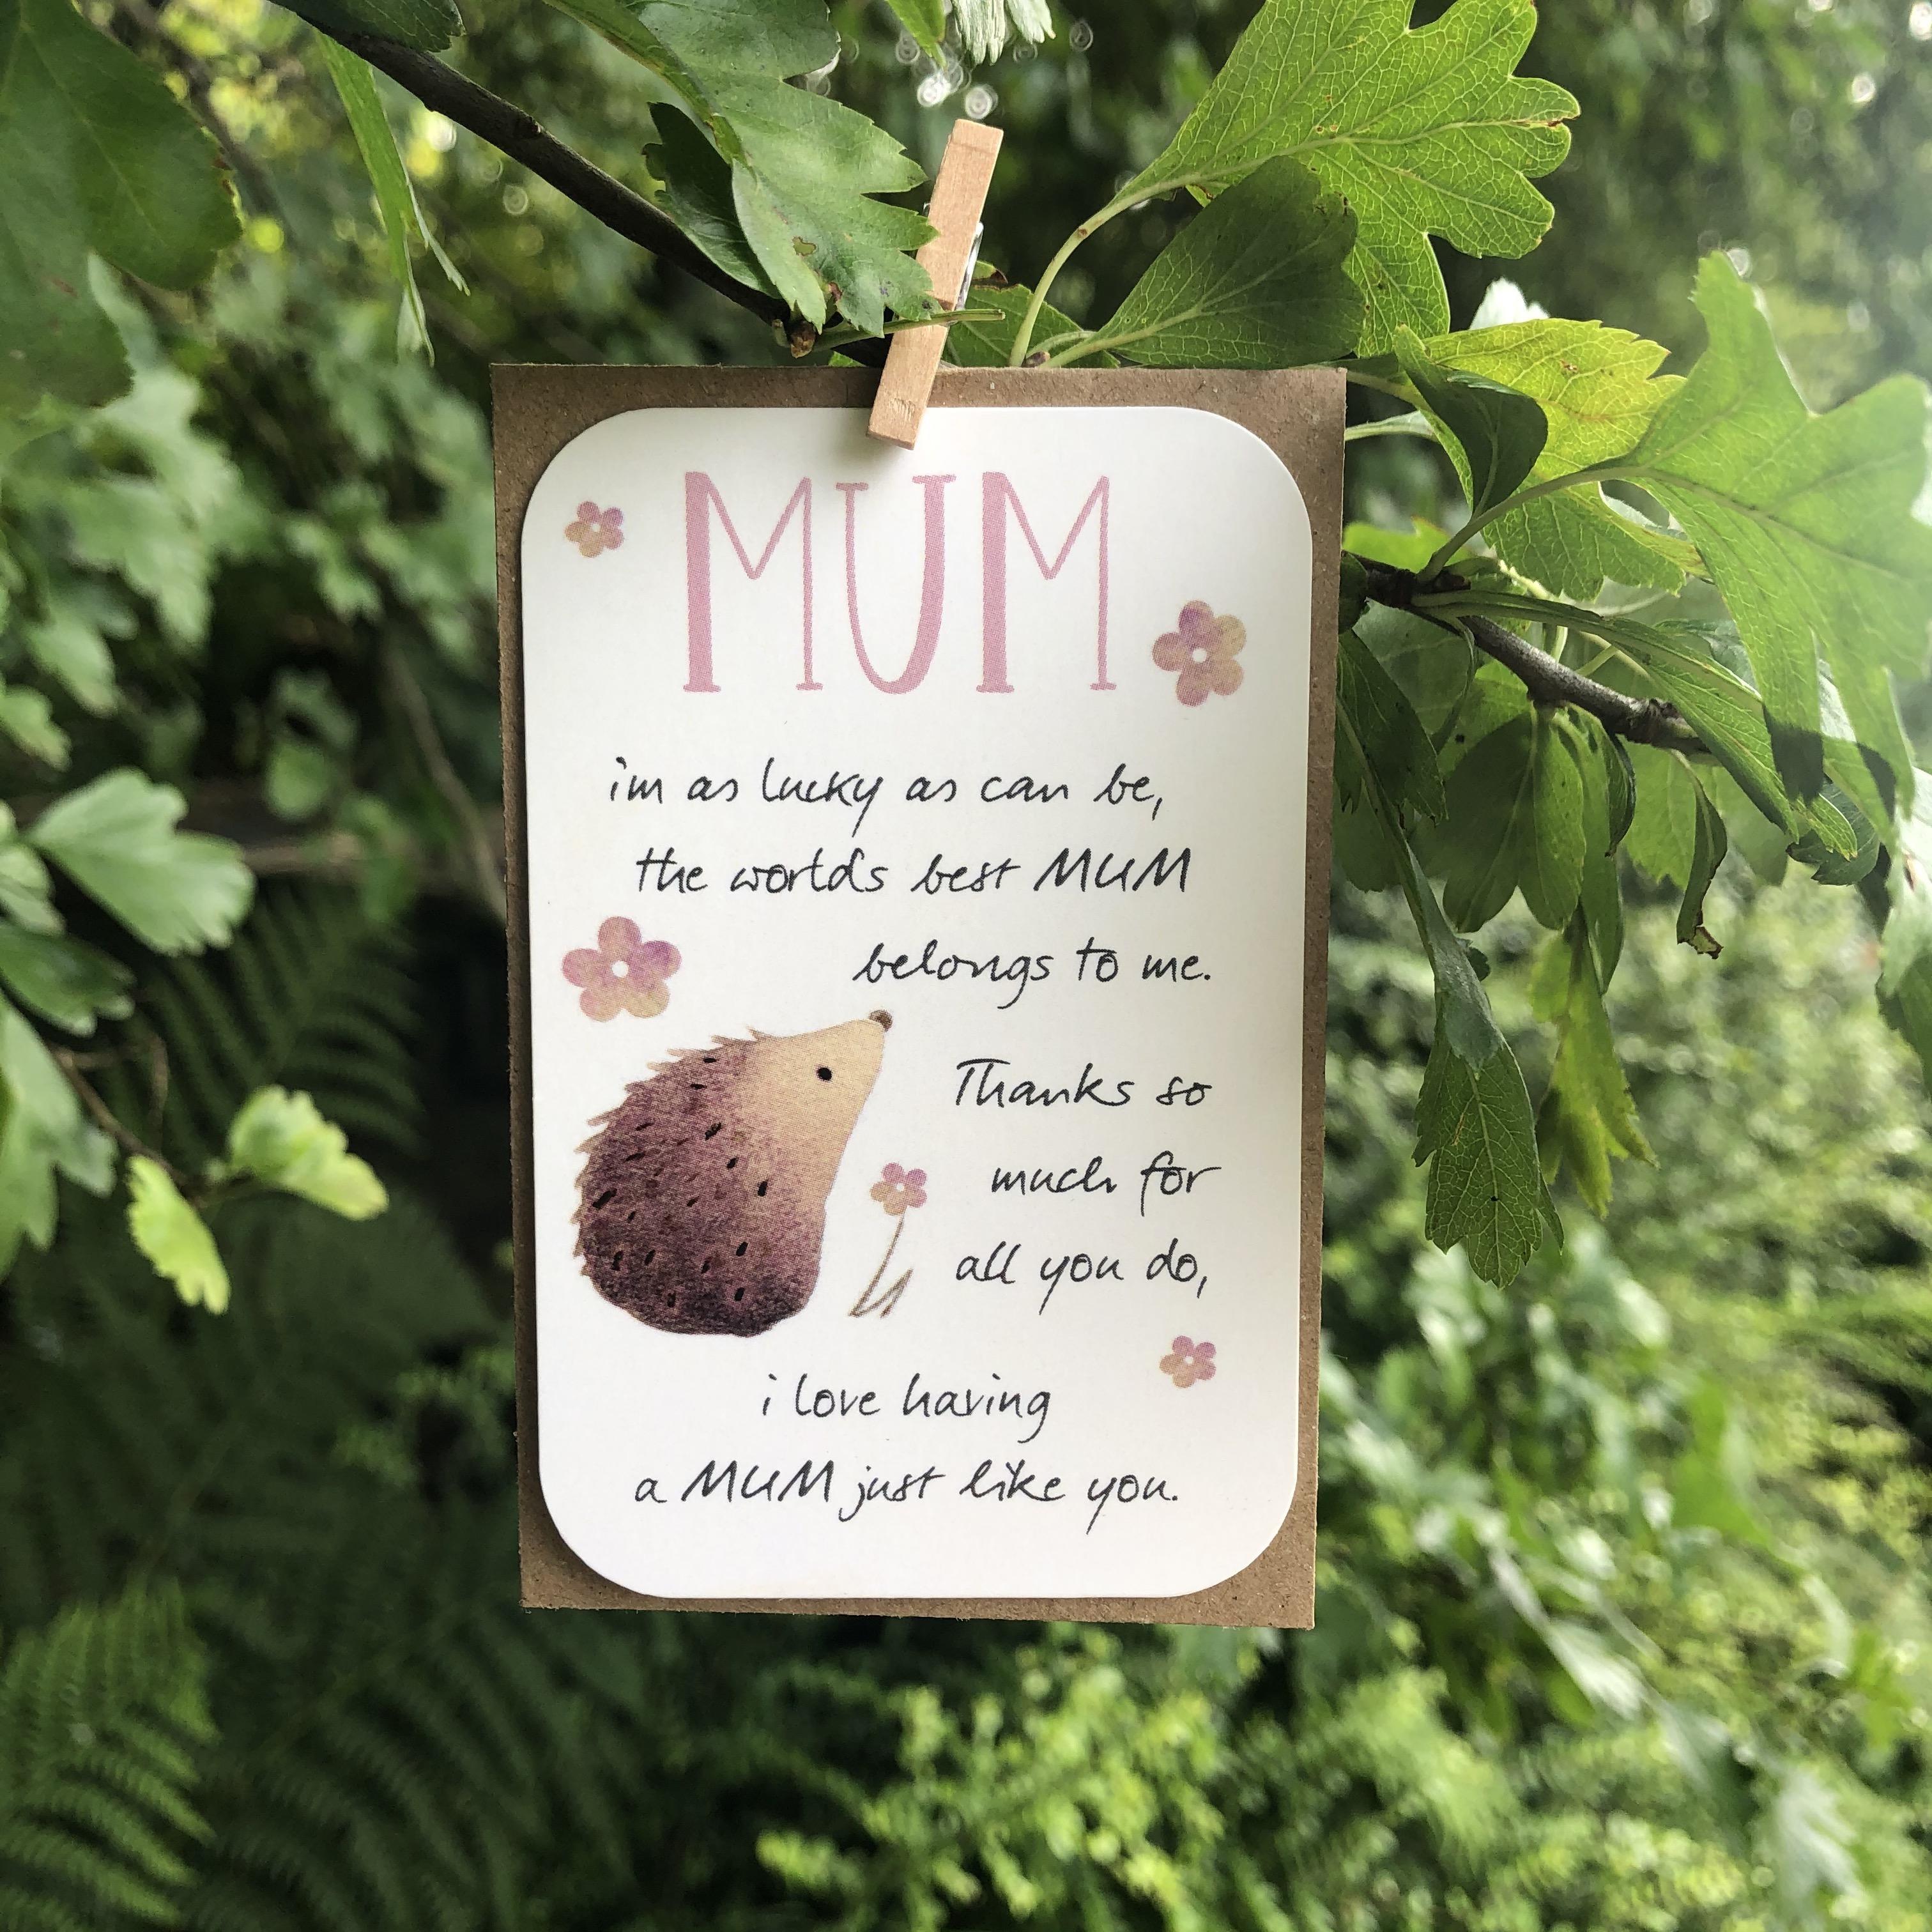 A small keepsake card with a Mum title, and cute little verse showing appreciation for a lovely mum